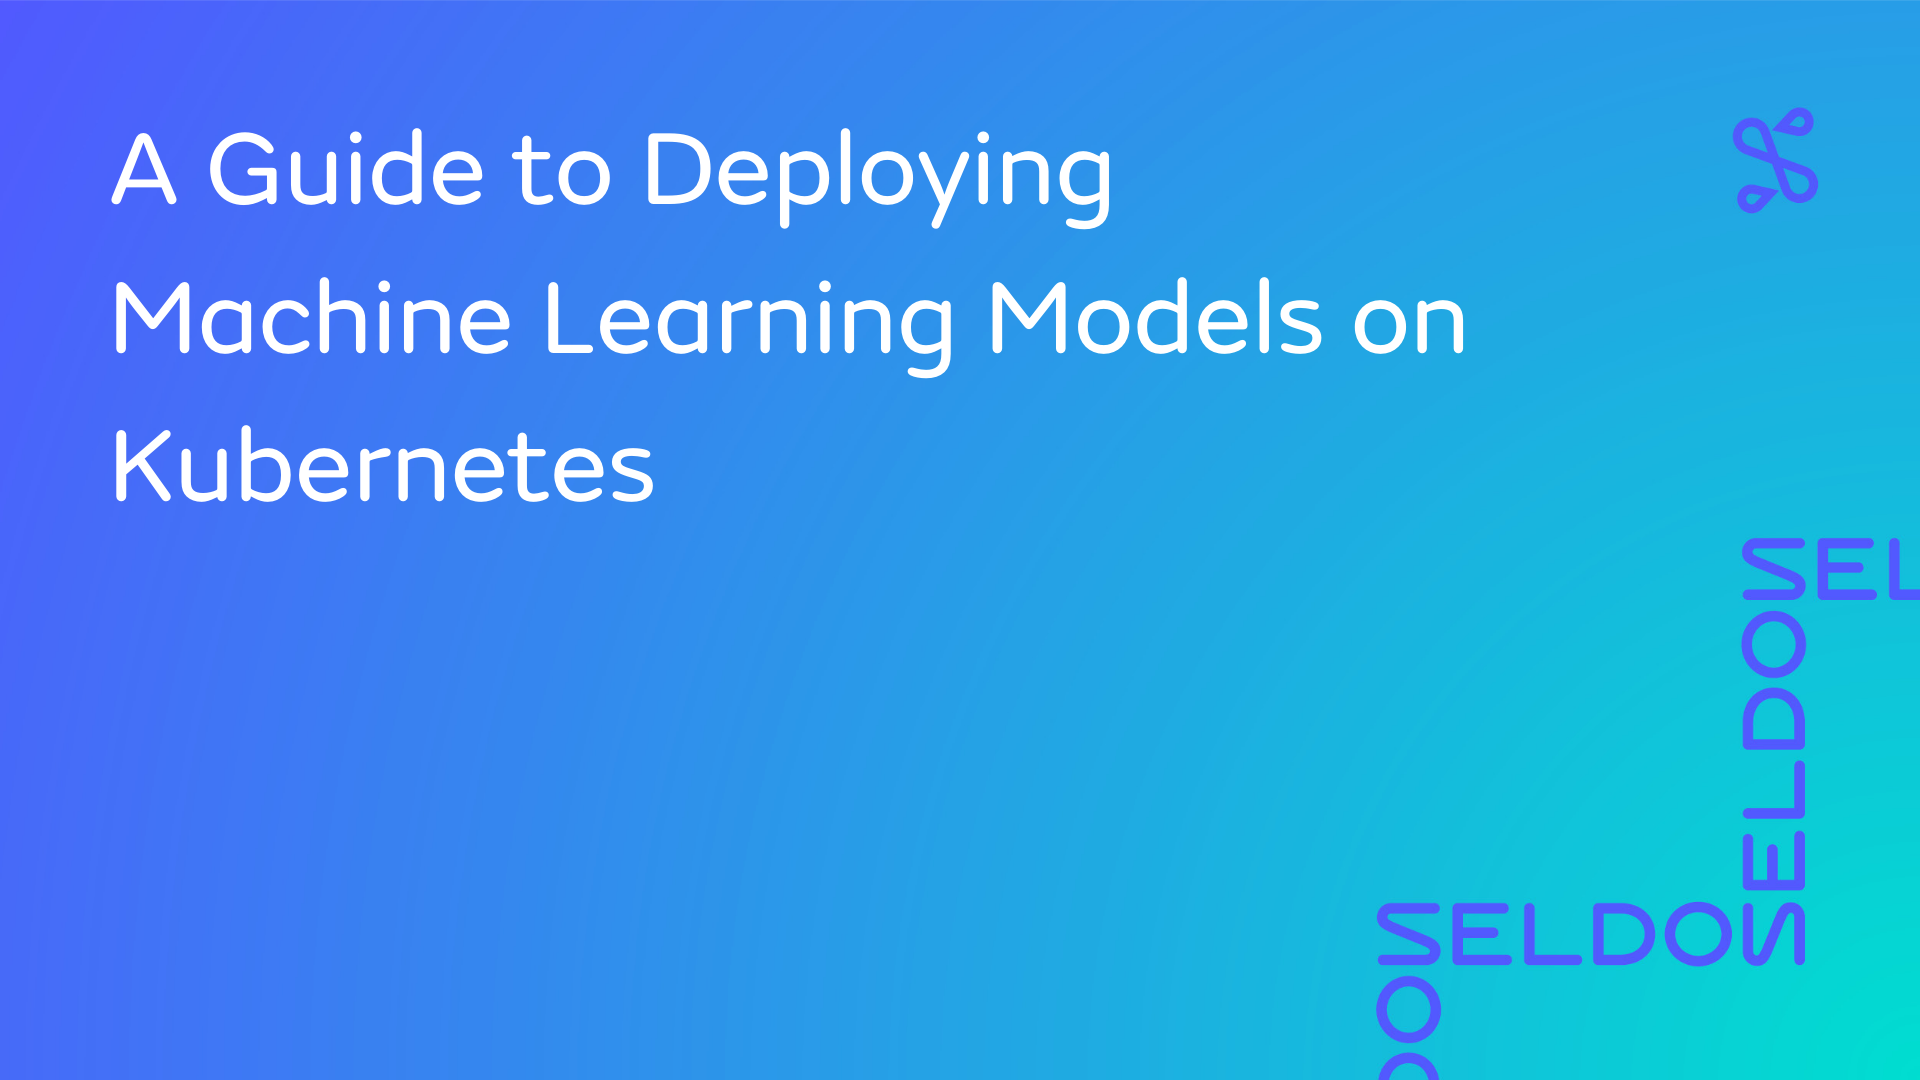 A Guide to Deploying Machine Learning Models on Kubernetes